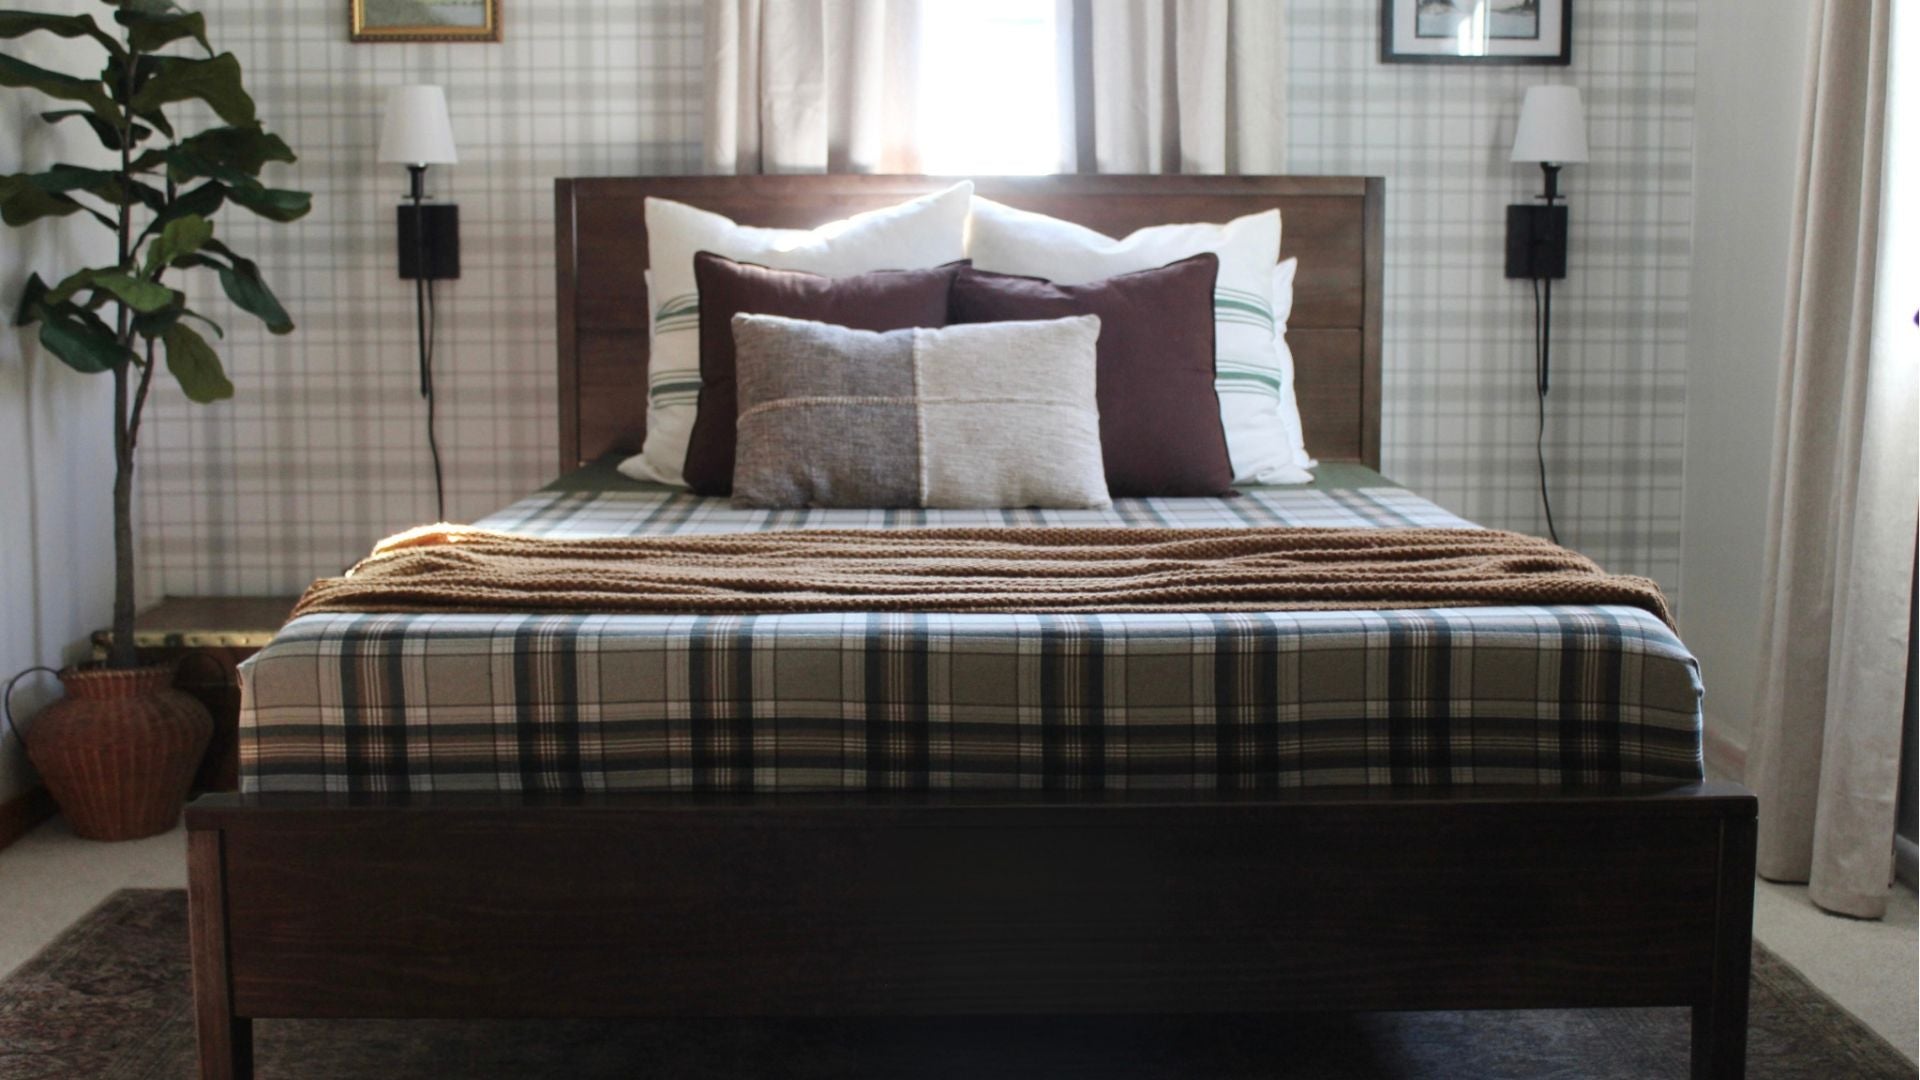 Queen-size wooden bed frame in walnut with plaid bedding, plaid wallpaper, and decor